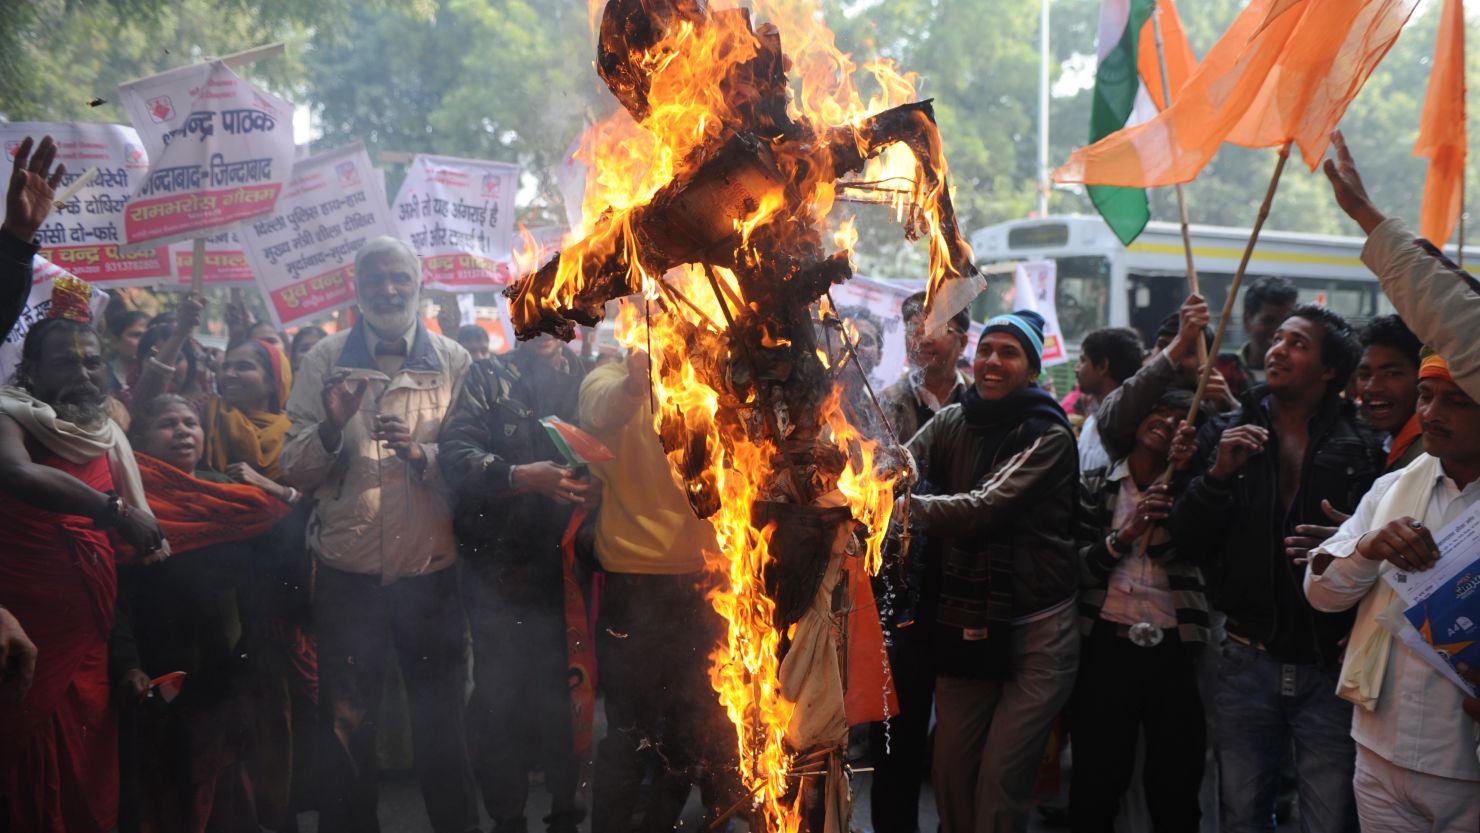 Indian demonstrators burn an effigy representing rapists during a protest in New Delhi on December 26, 2012.